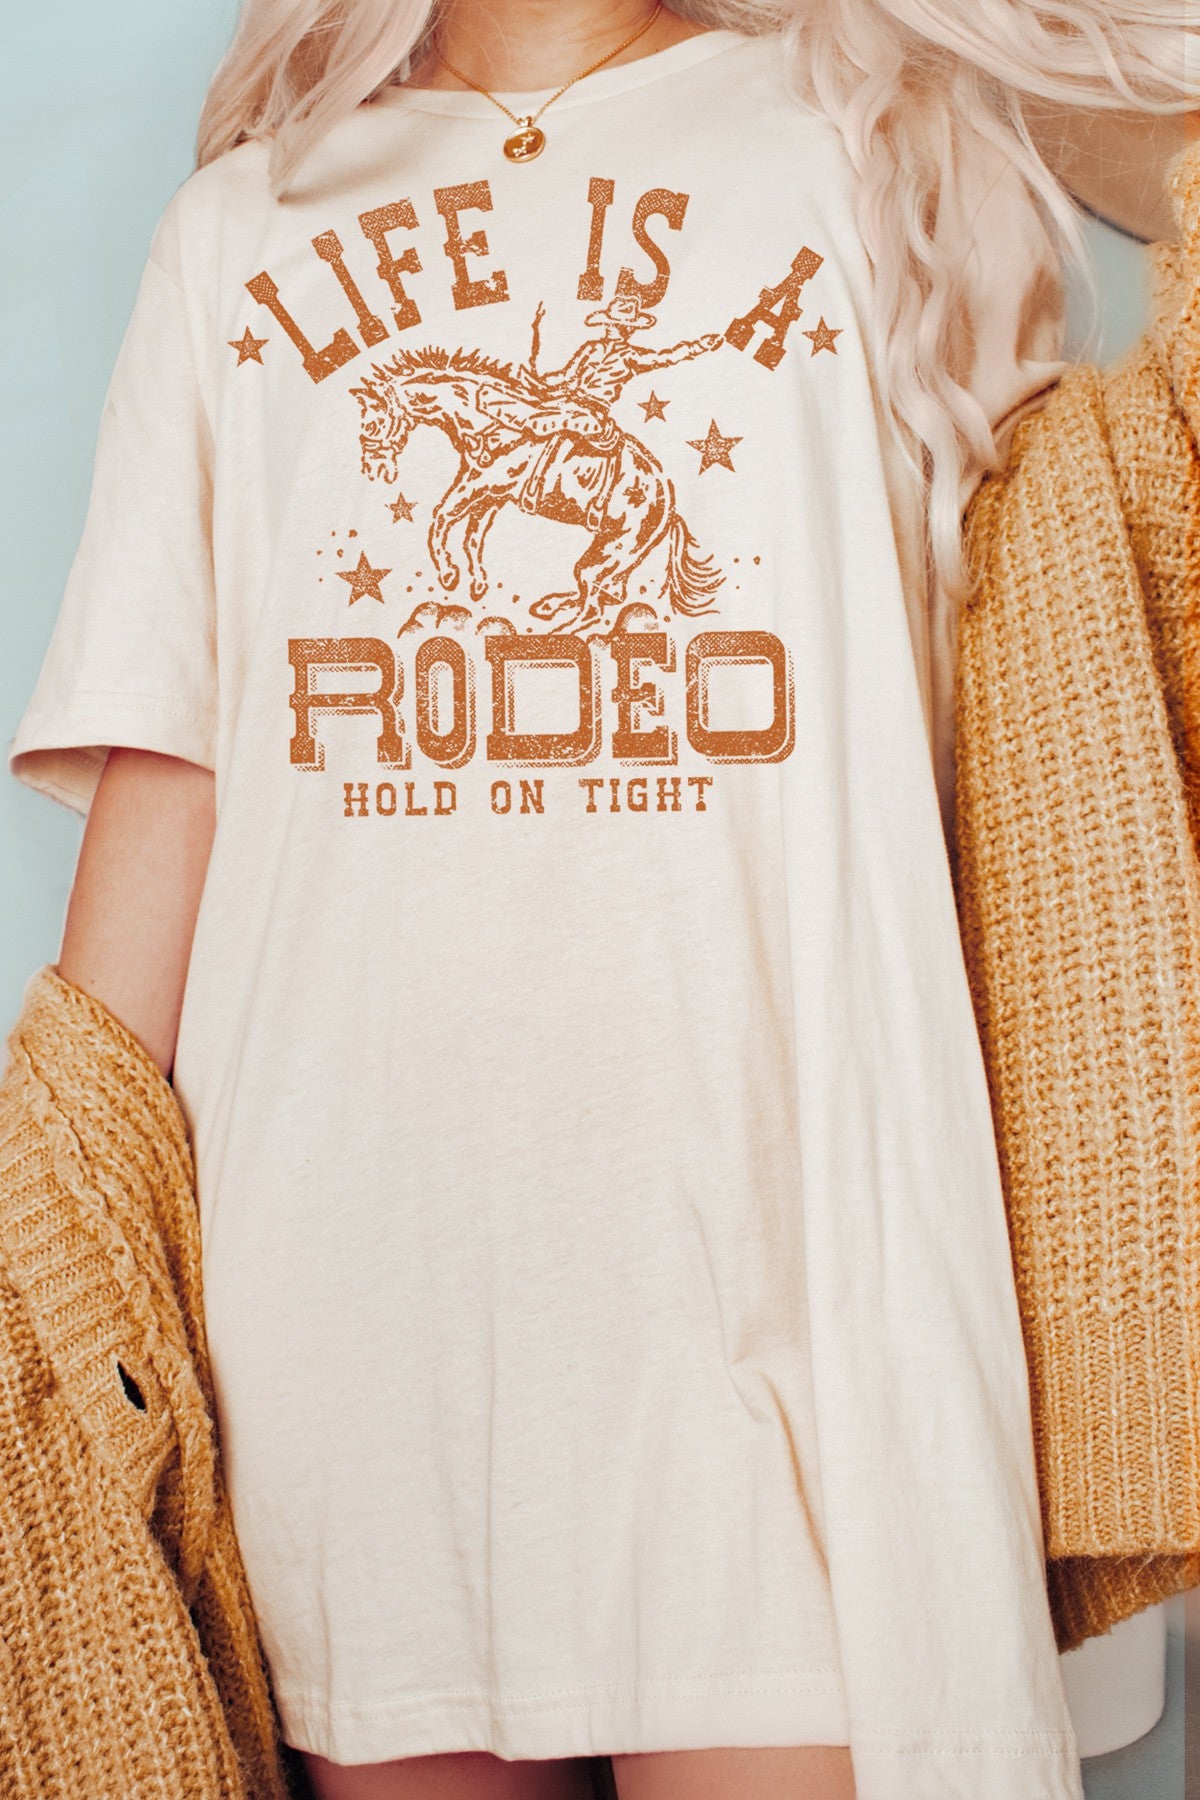 Chad Rodeo Life Oversized Graphic Tee